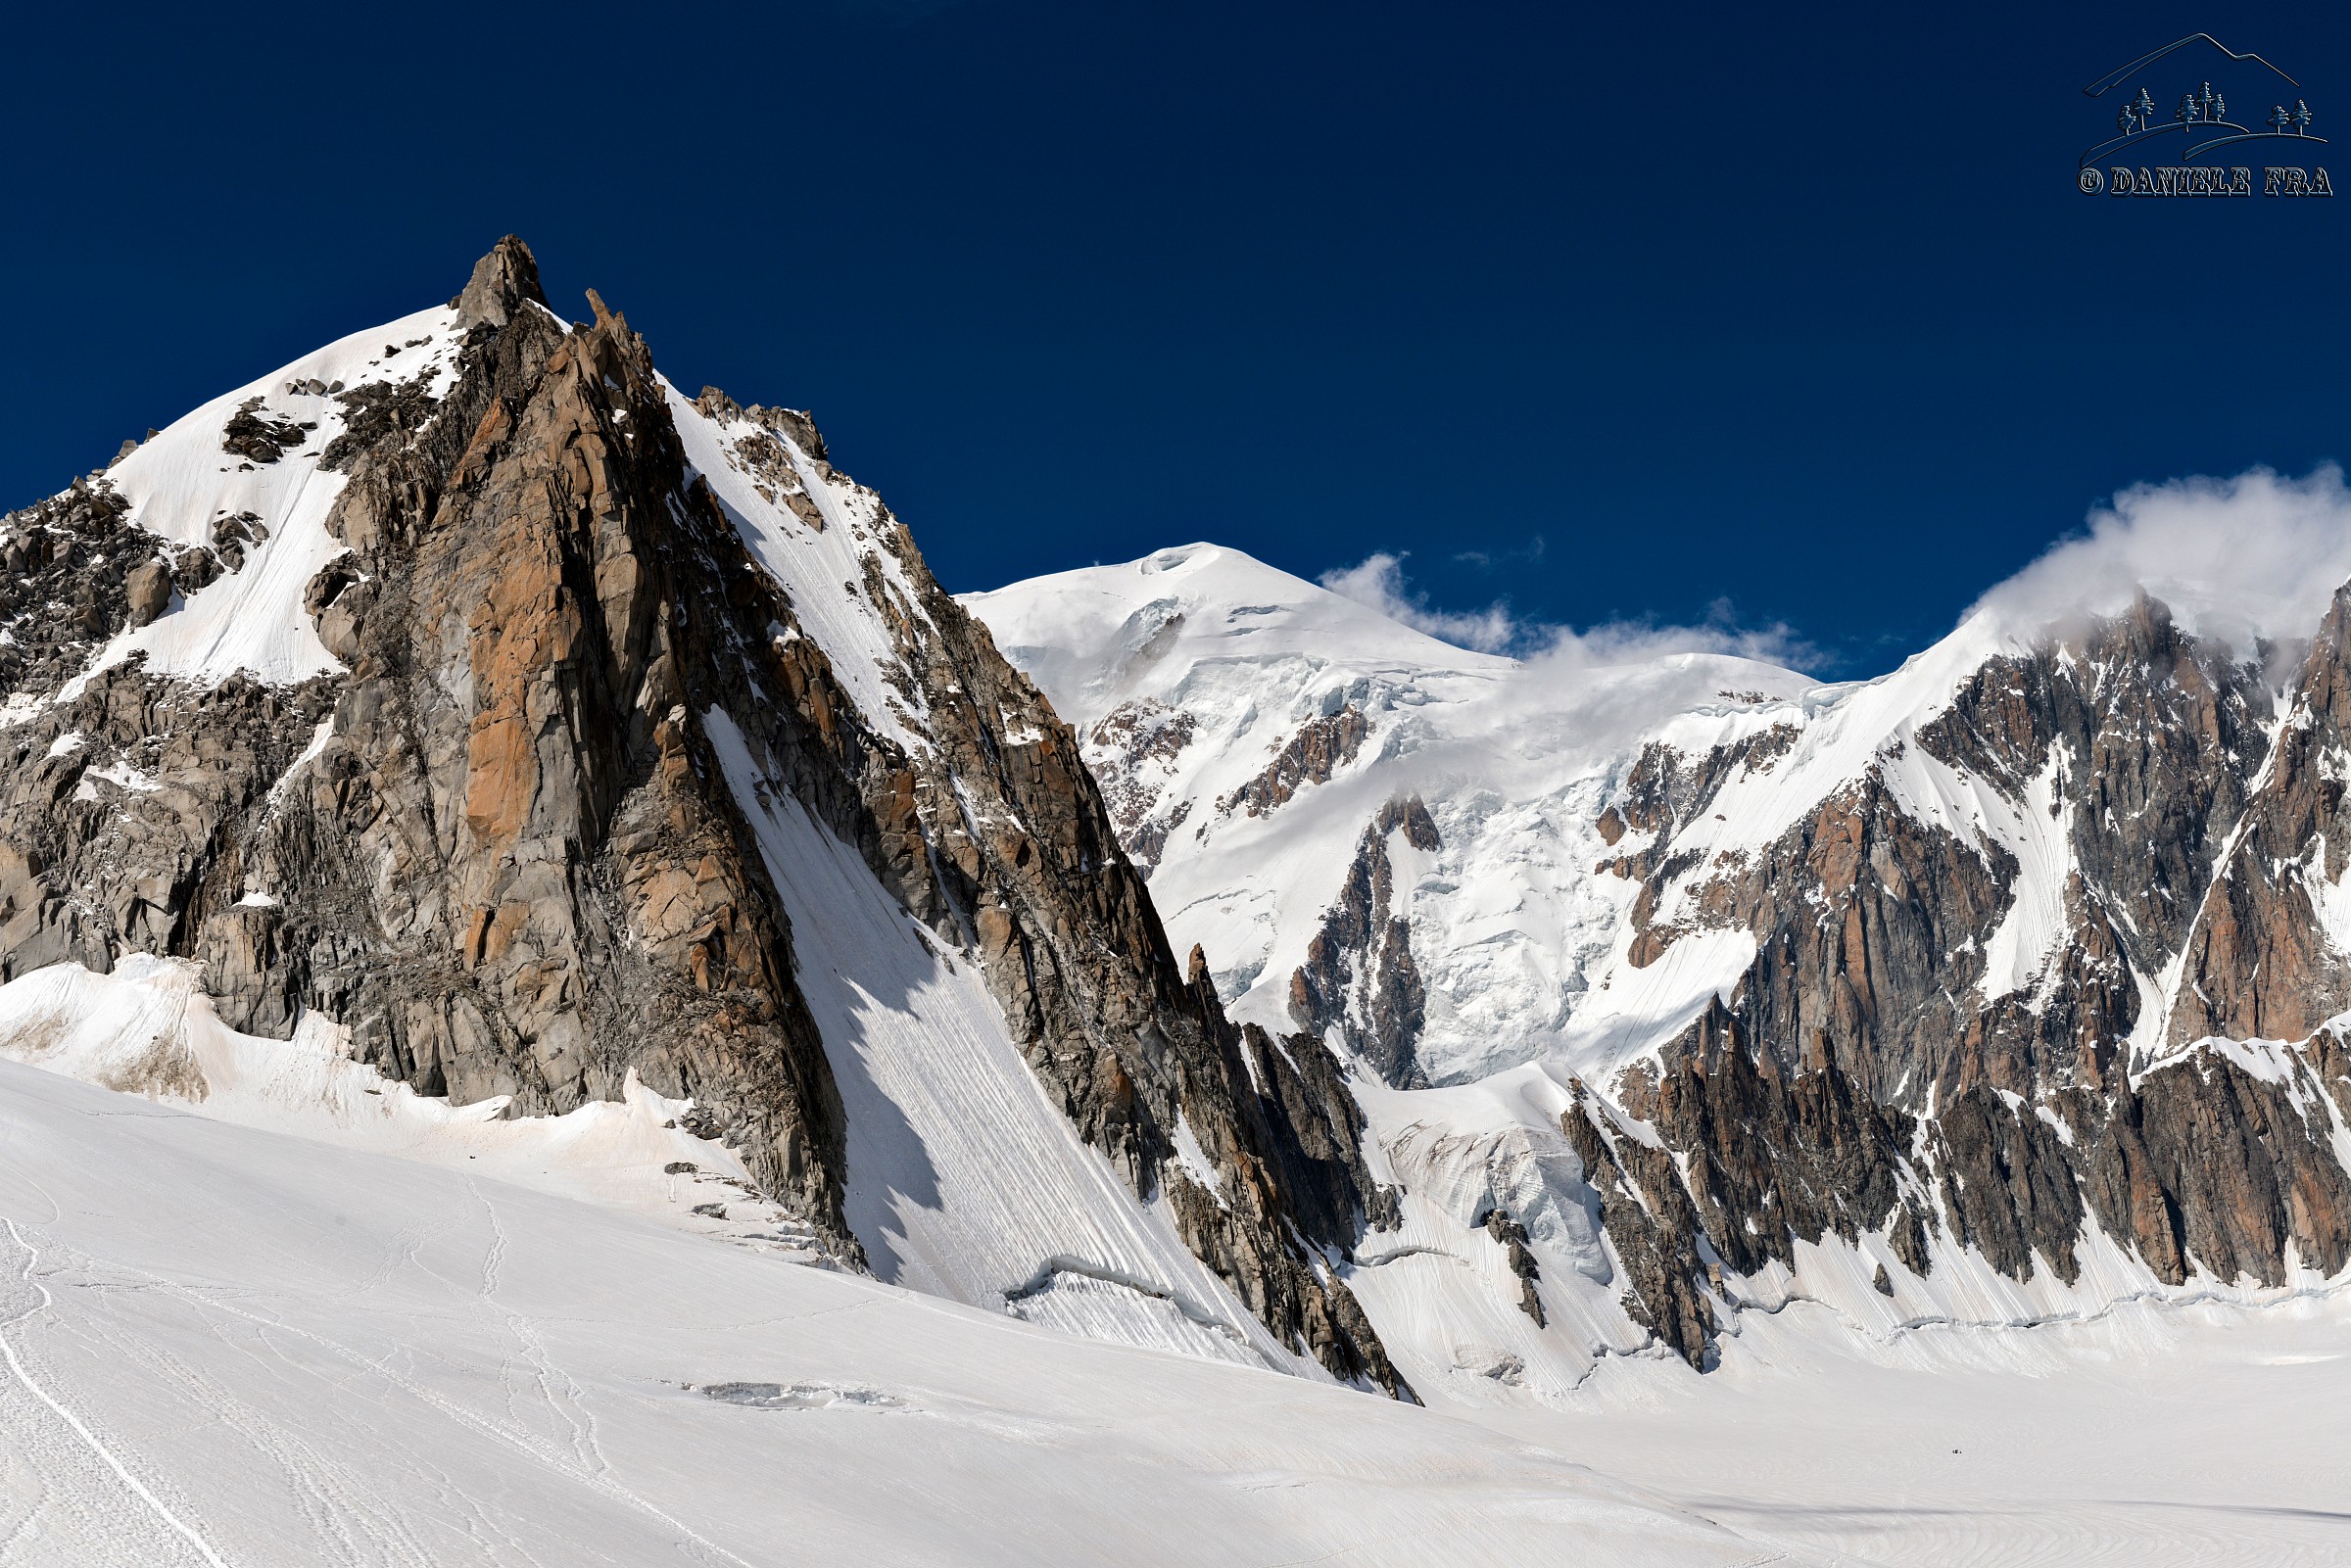 Tour Ronde and summit of Mont Blanc...